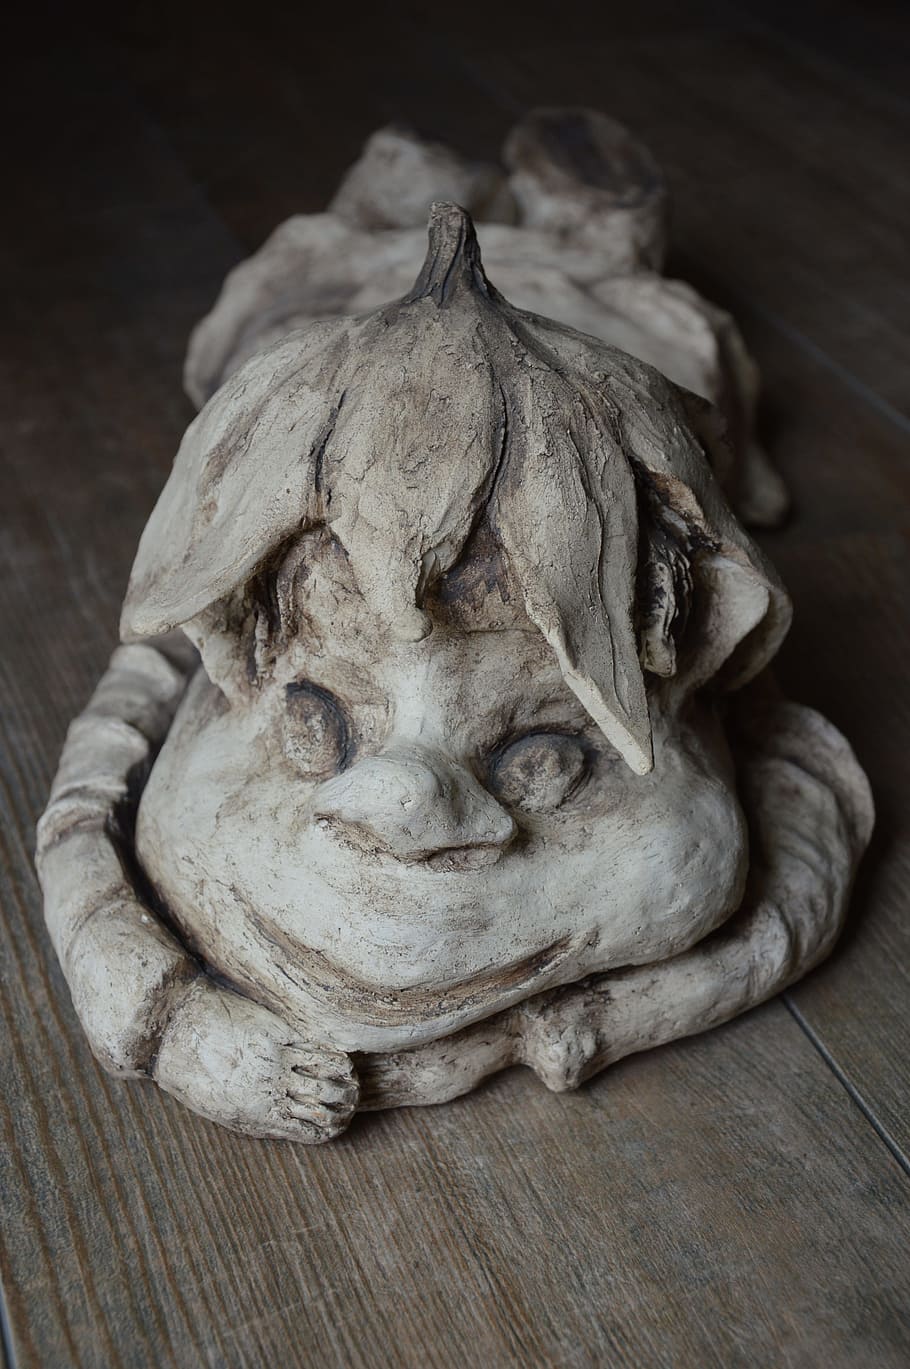 Troll, Ceramic, Workshops, Statue, Face, wood - material, no people